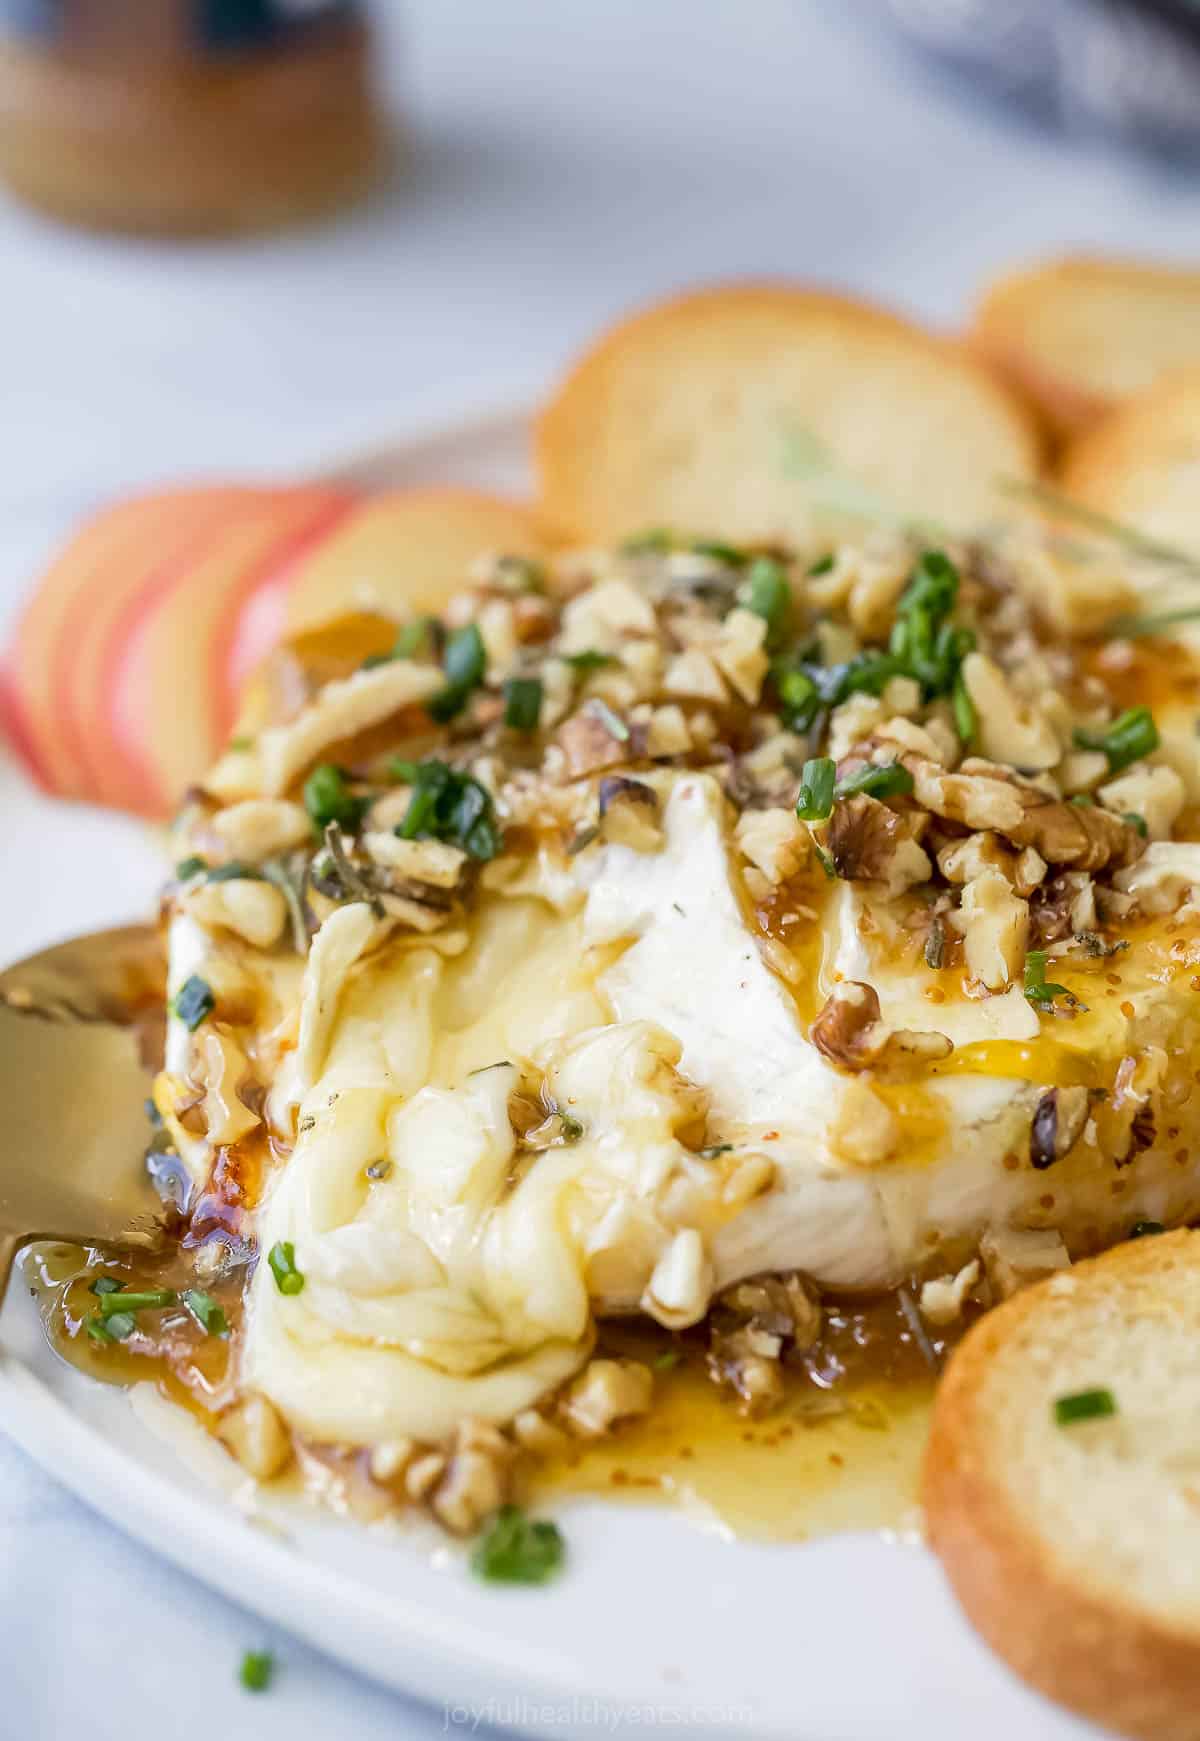 Melty cheese with toppings. 